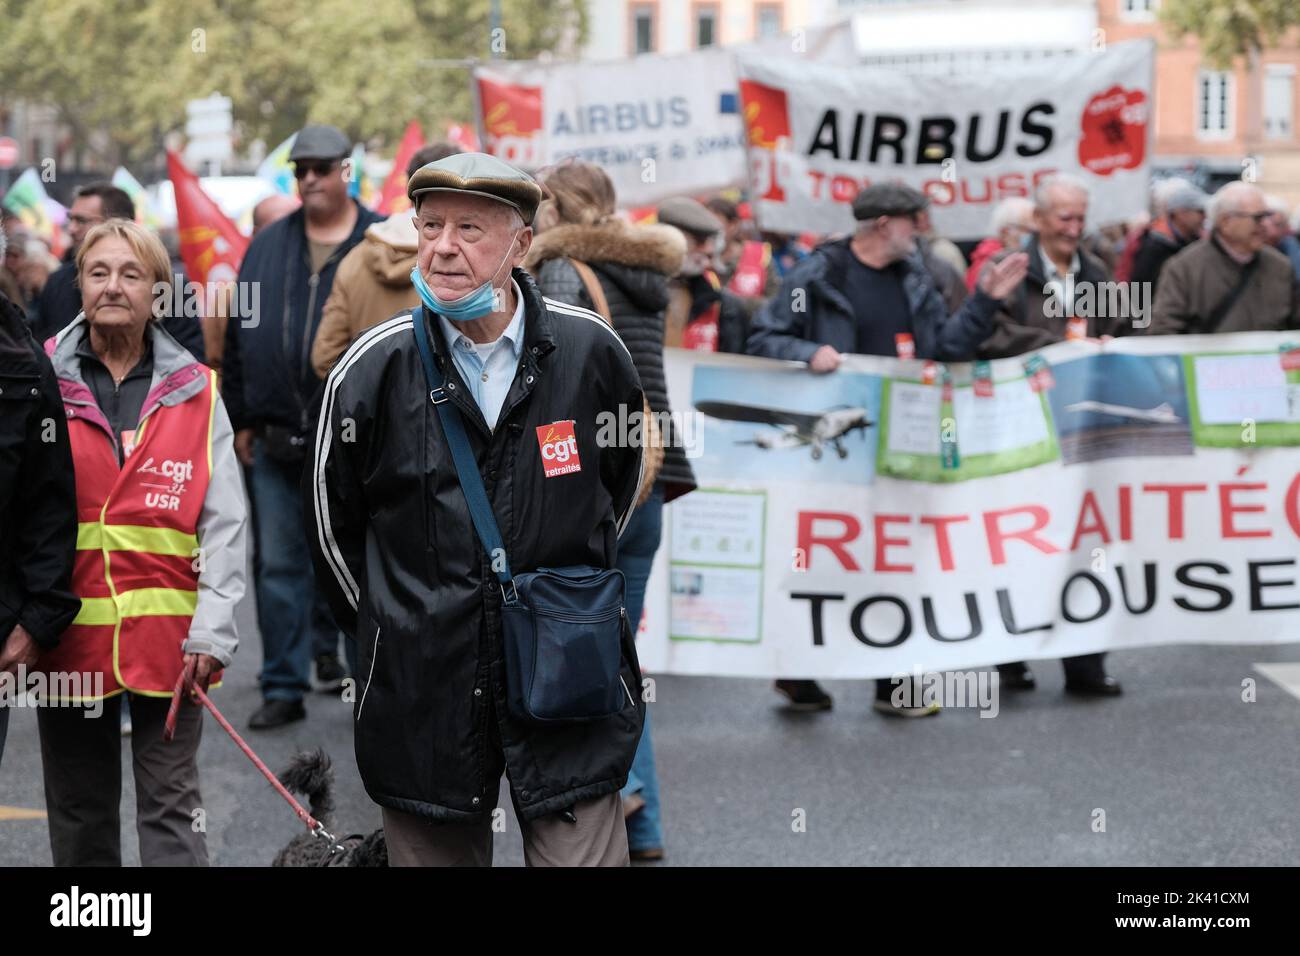 In Toulouse, as in many other cities in France, several hundred people responded to the call of the various unions on September 29, 2022. Through this day of strikes and demonstrations, they intend to fight for a rise in wages during this periode of inflation, but also against the pension reform initiated by the government. Photo by Patrick Batard/ABACAPRESS.COM Stock Photo